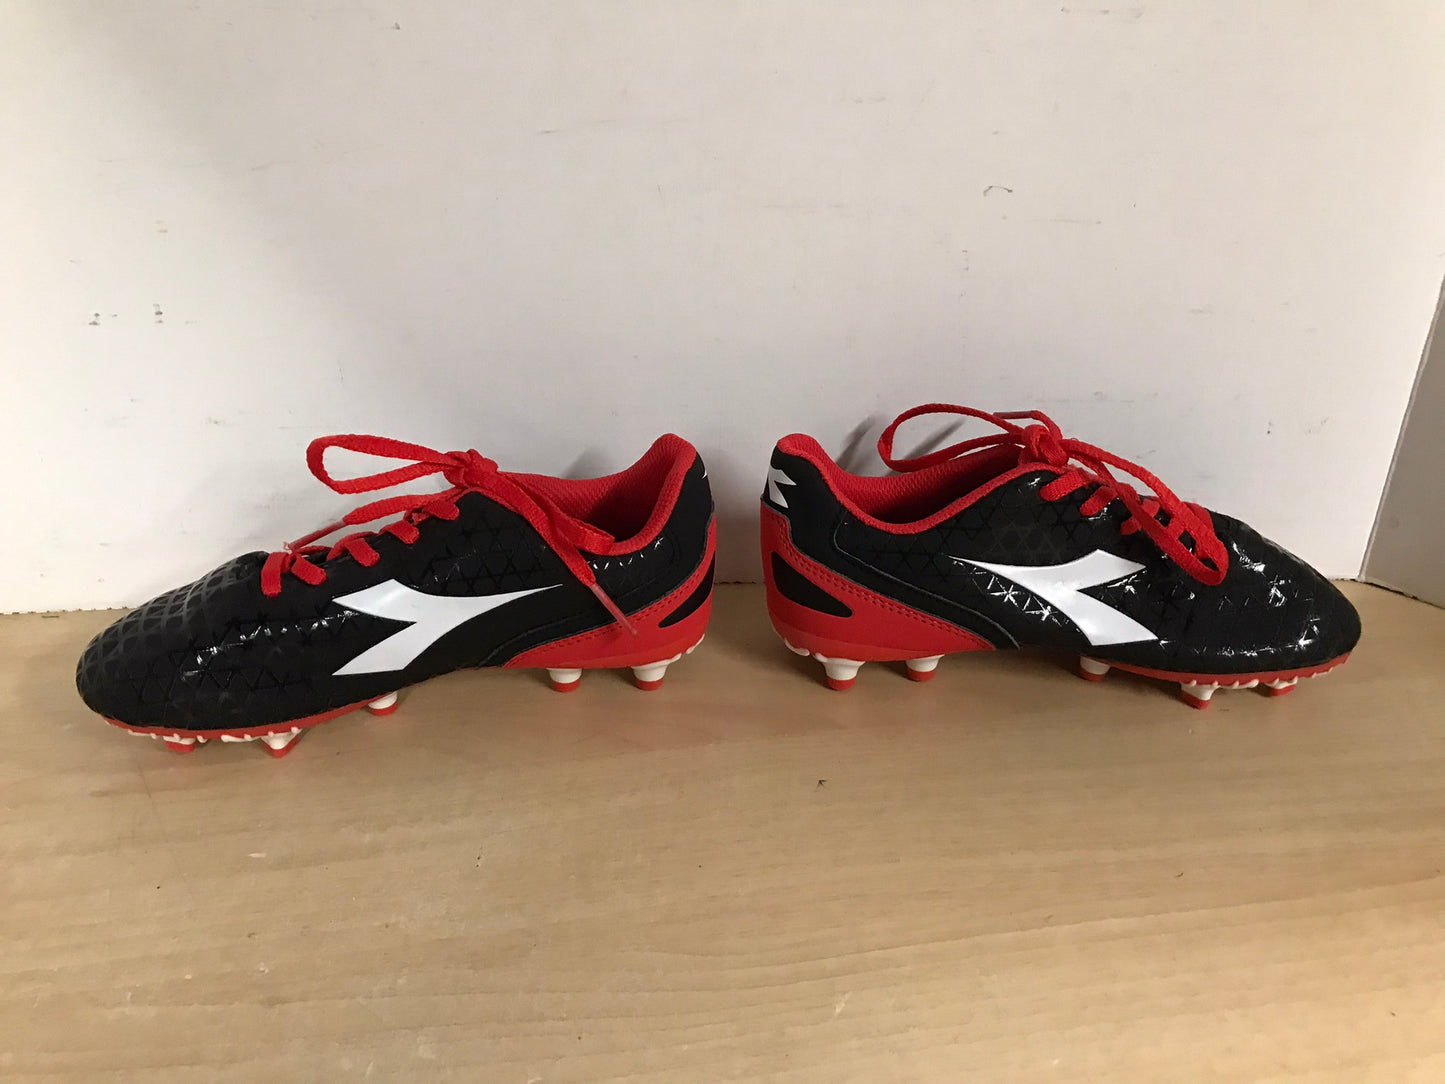 Soccer Shoes Cleats Child Size 3 Adidas Black White Red Excellent New Demo Model